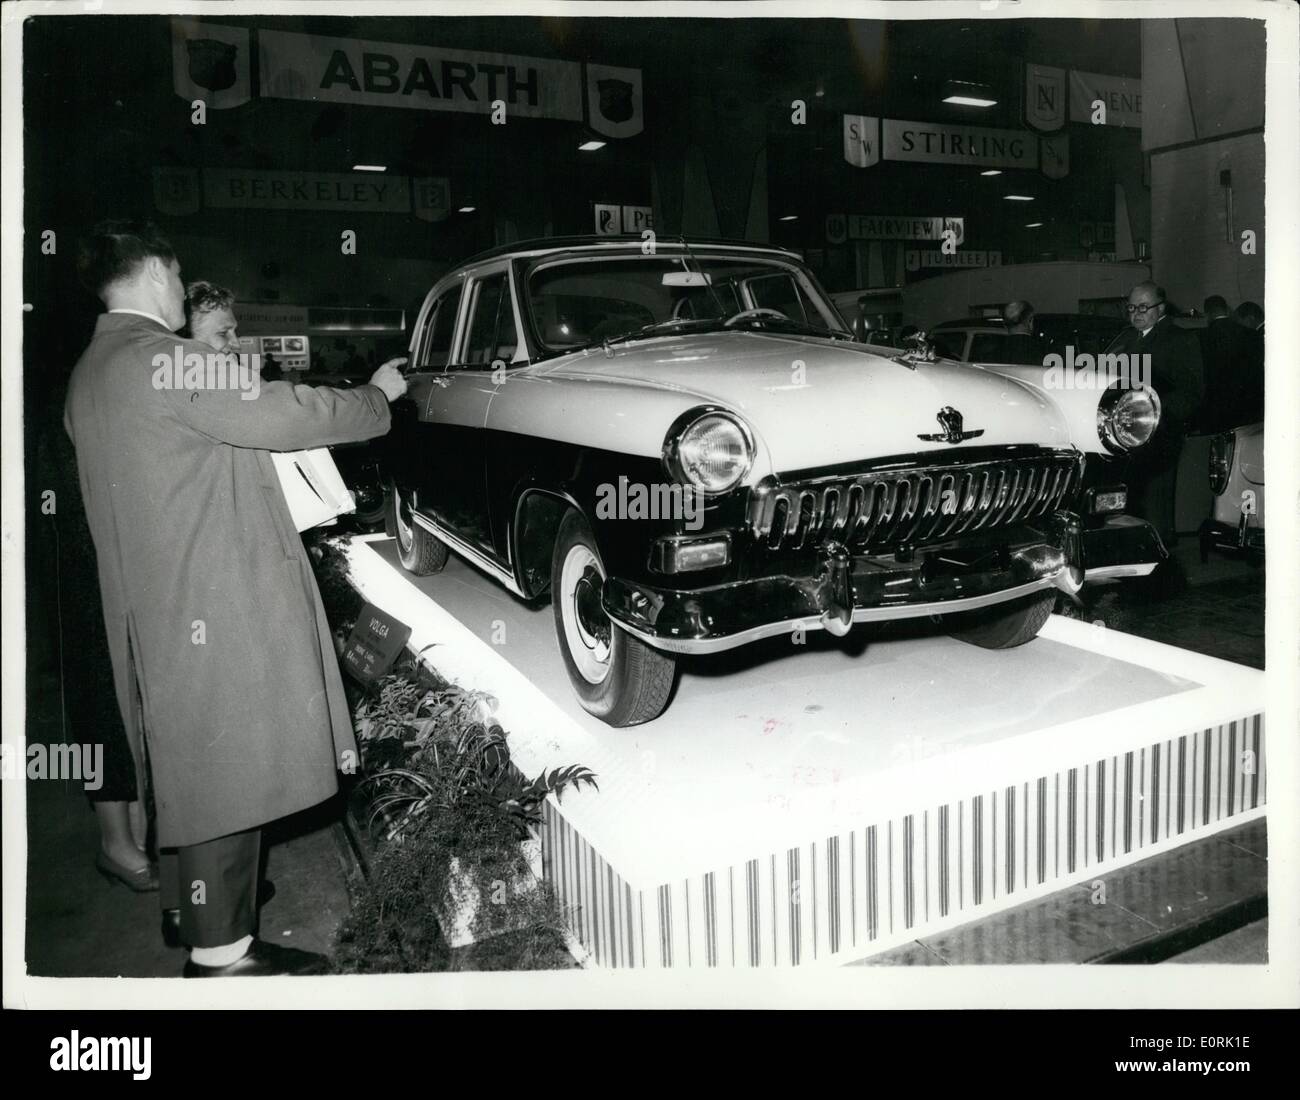 Oct. 10, 1959 - Motor Show Preview At Earls Court: Russian 21/2 Litre Volga. Photo shows View of the Russian Volga 21/2 Litre - Stock Photo